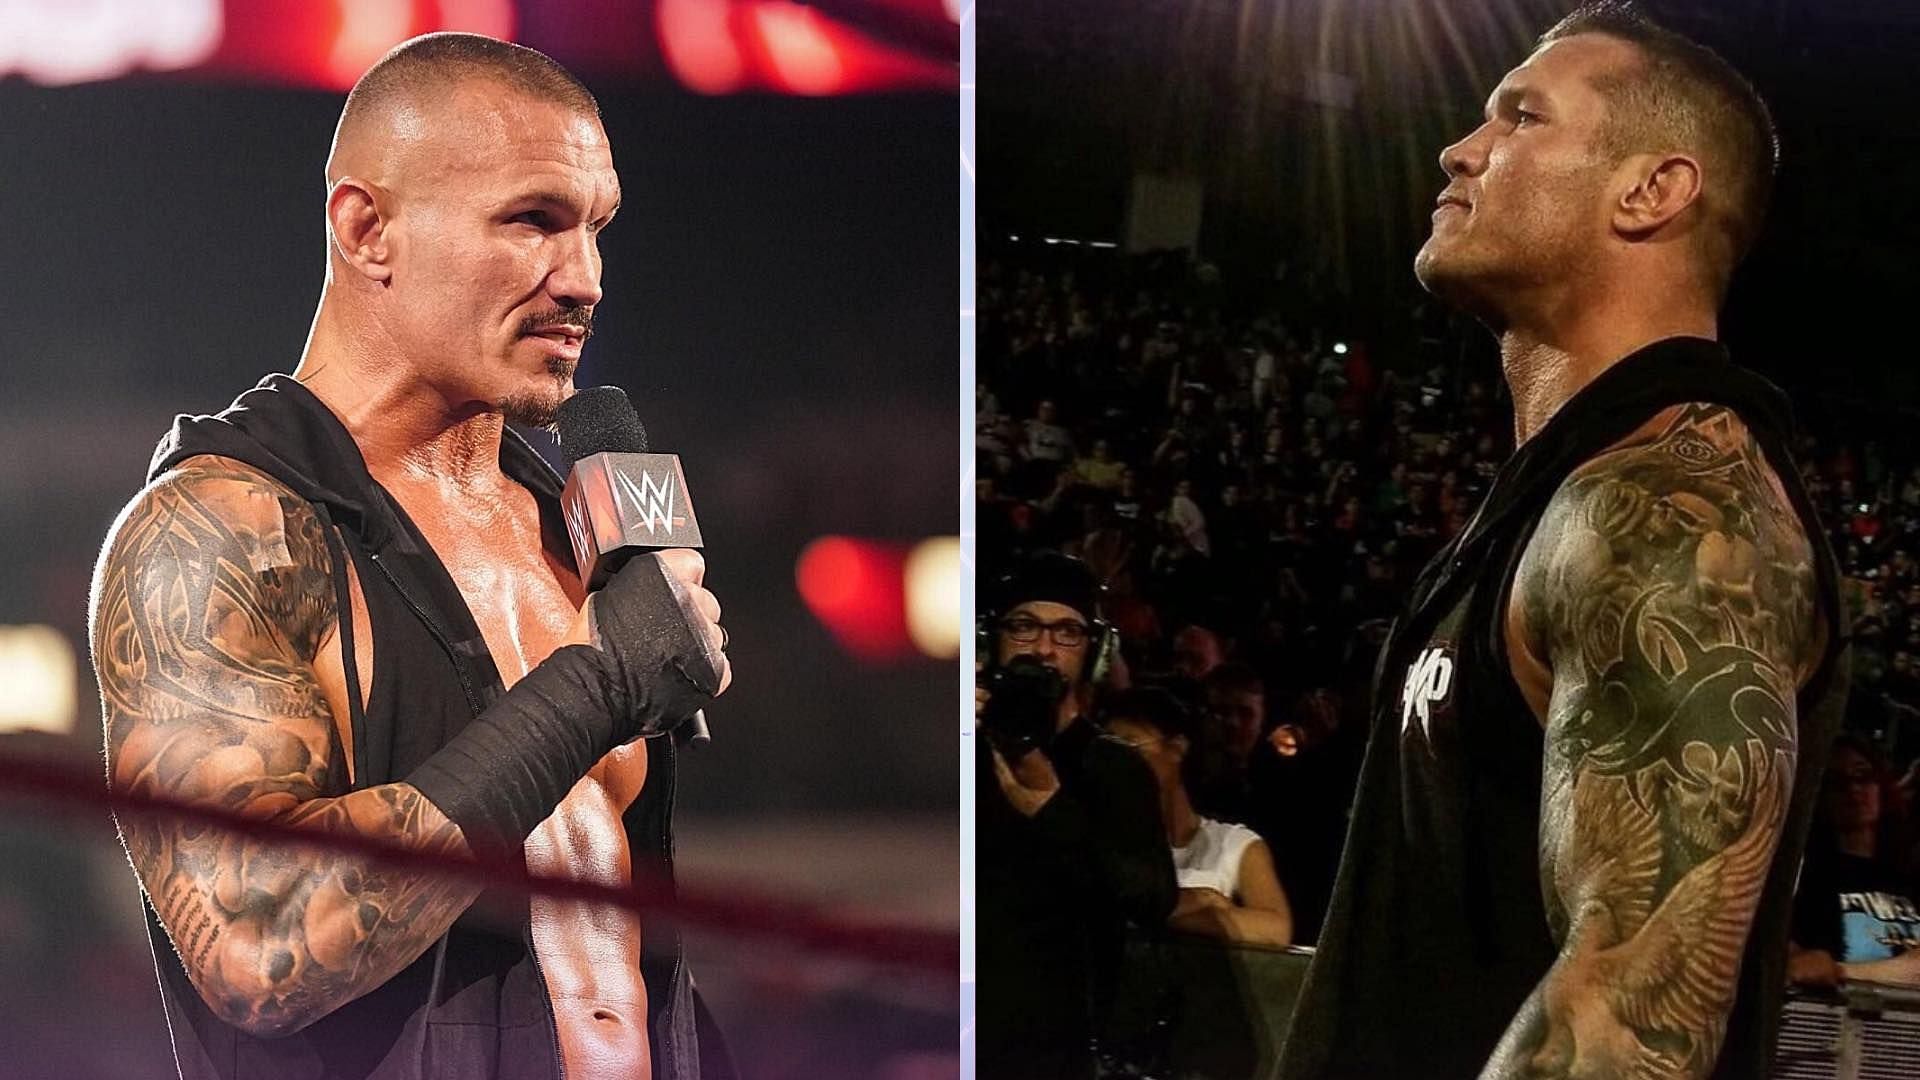 Randy Orton could potentially return at WWE Survivor Series WarGames and he may not come alone